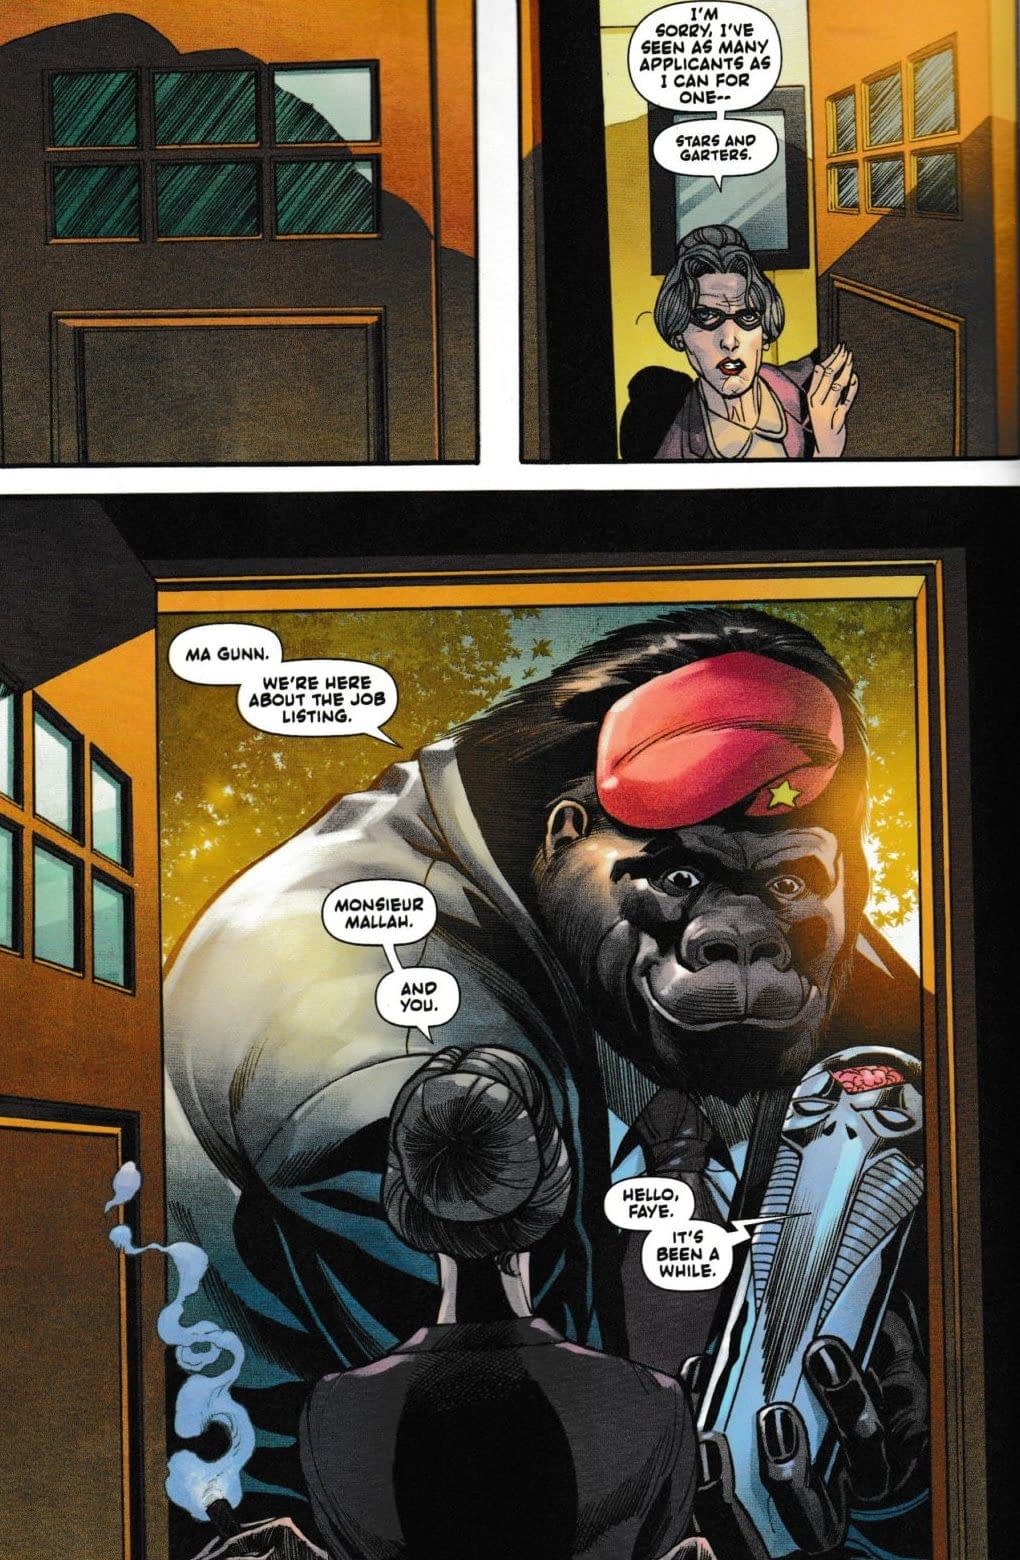 Where In The World Are Monsieur Mallah And The Brain? (Spoilers)